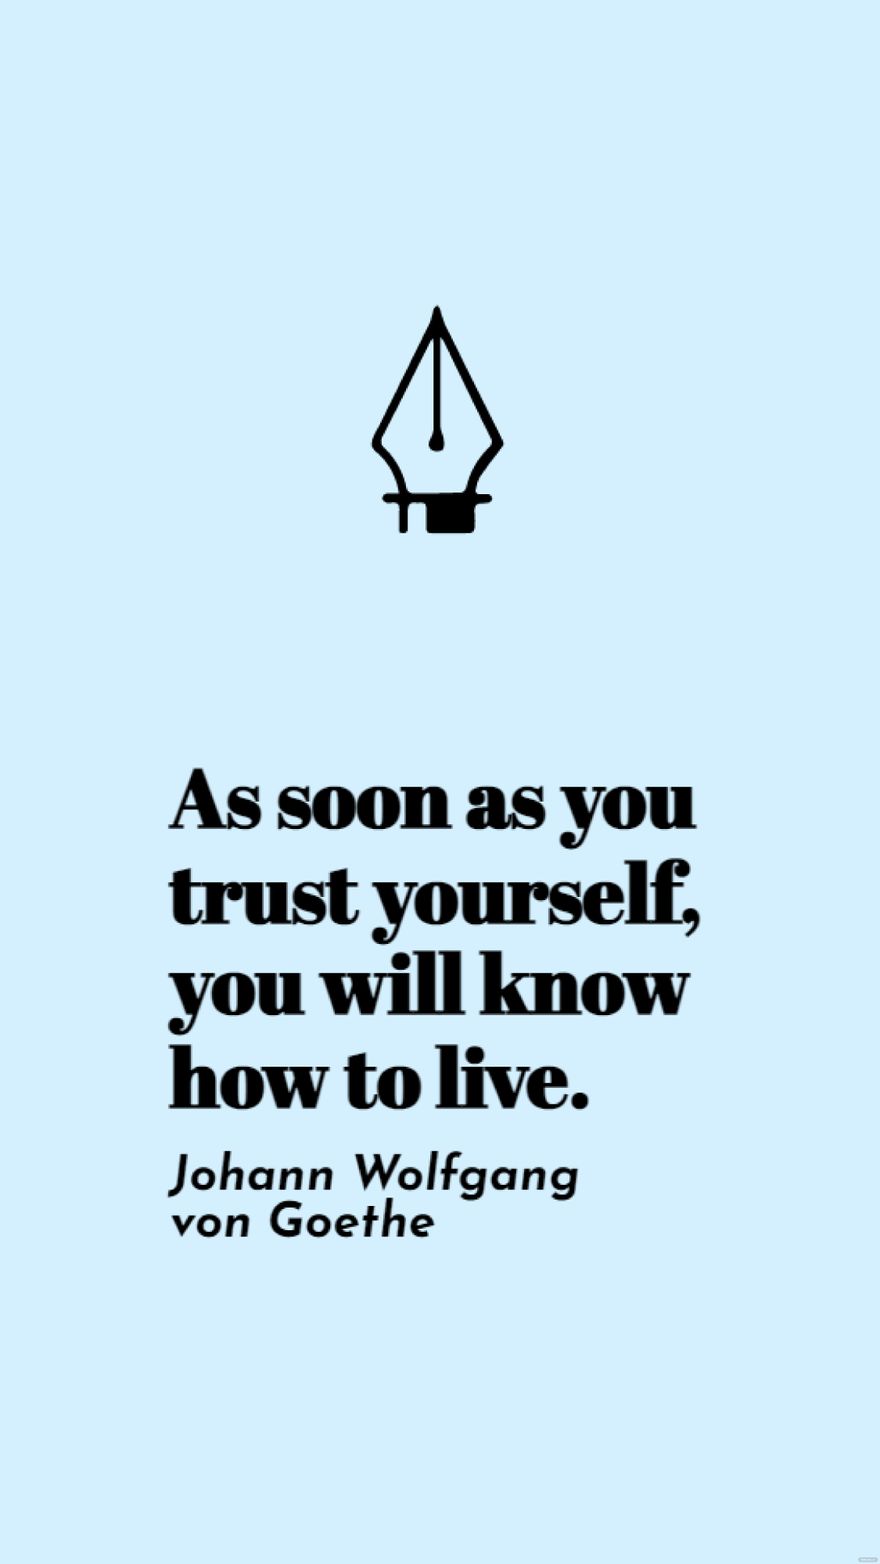 Johann Wolfgang von Goethe - As soon as you trust yourself, you will know how to live. in JPG